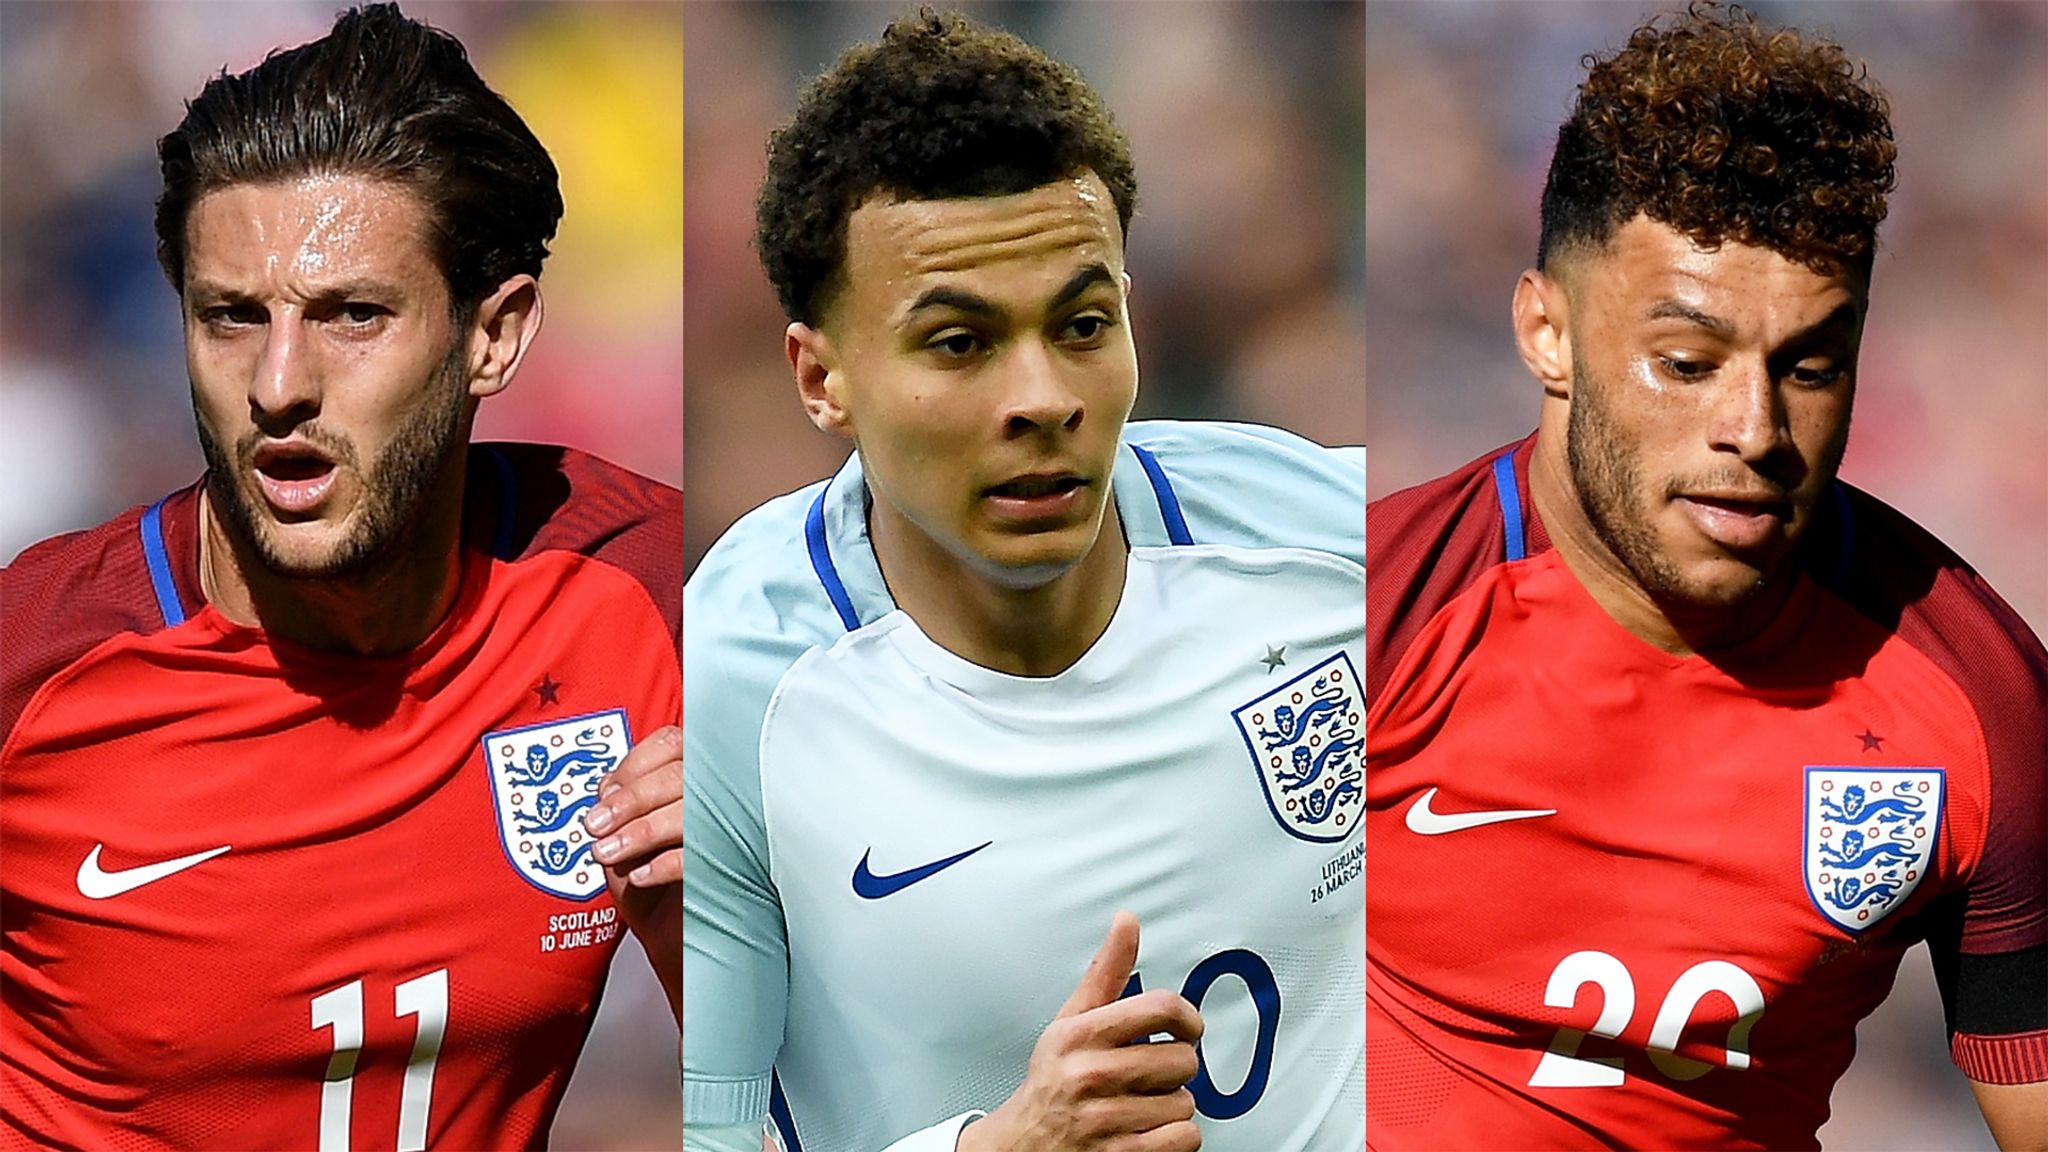 England's midfielders Who should Gareth Southgate take to the World